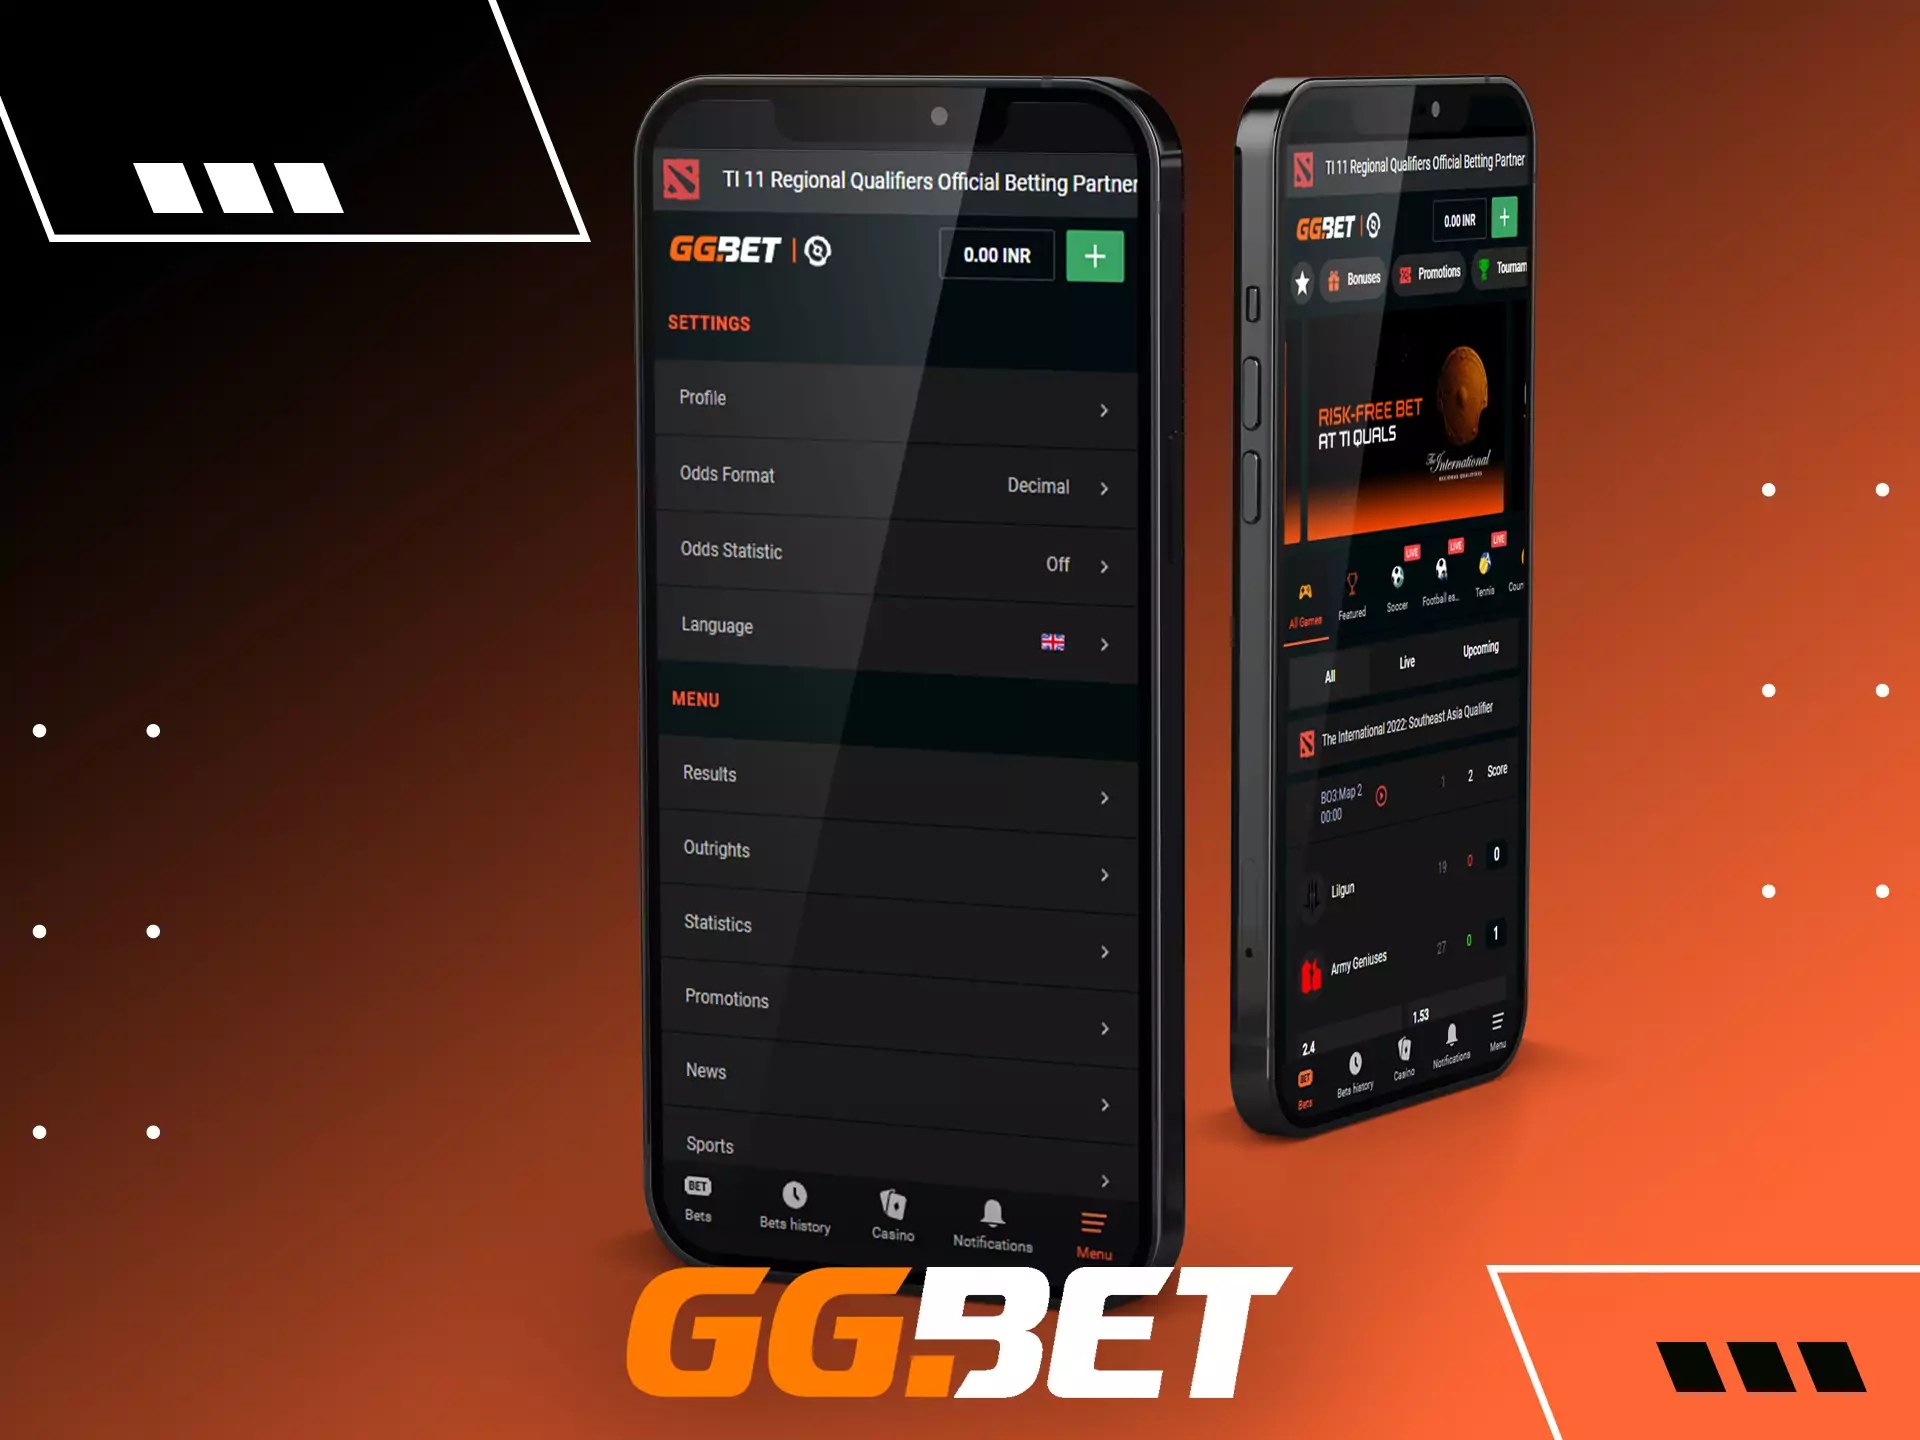 If you can't or don't want to install the GGBet app, use the mobile website.